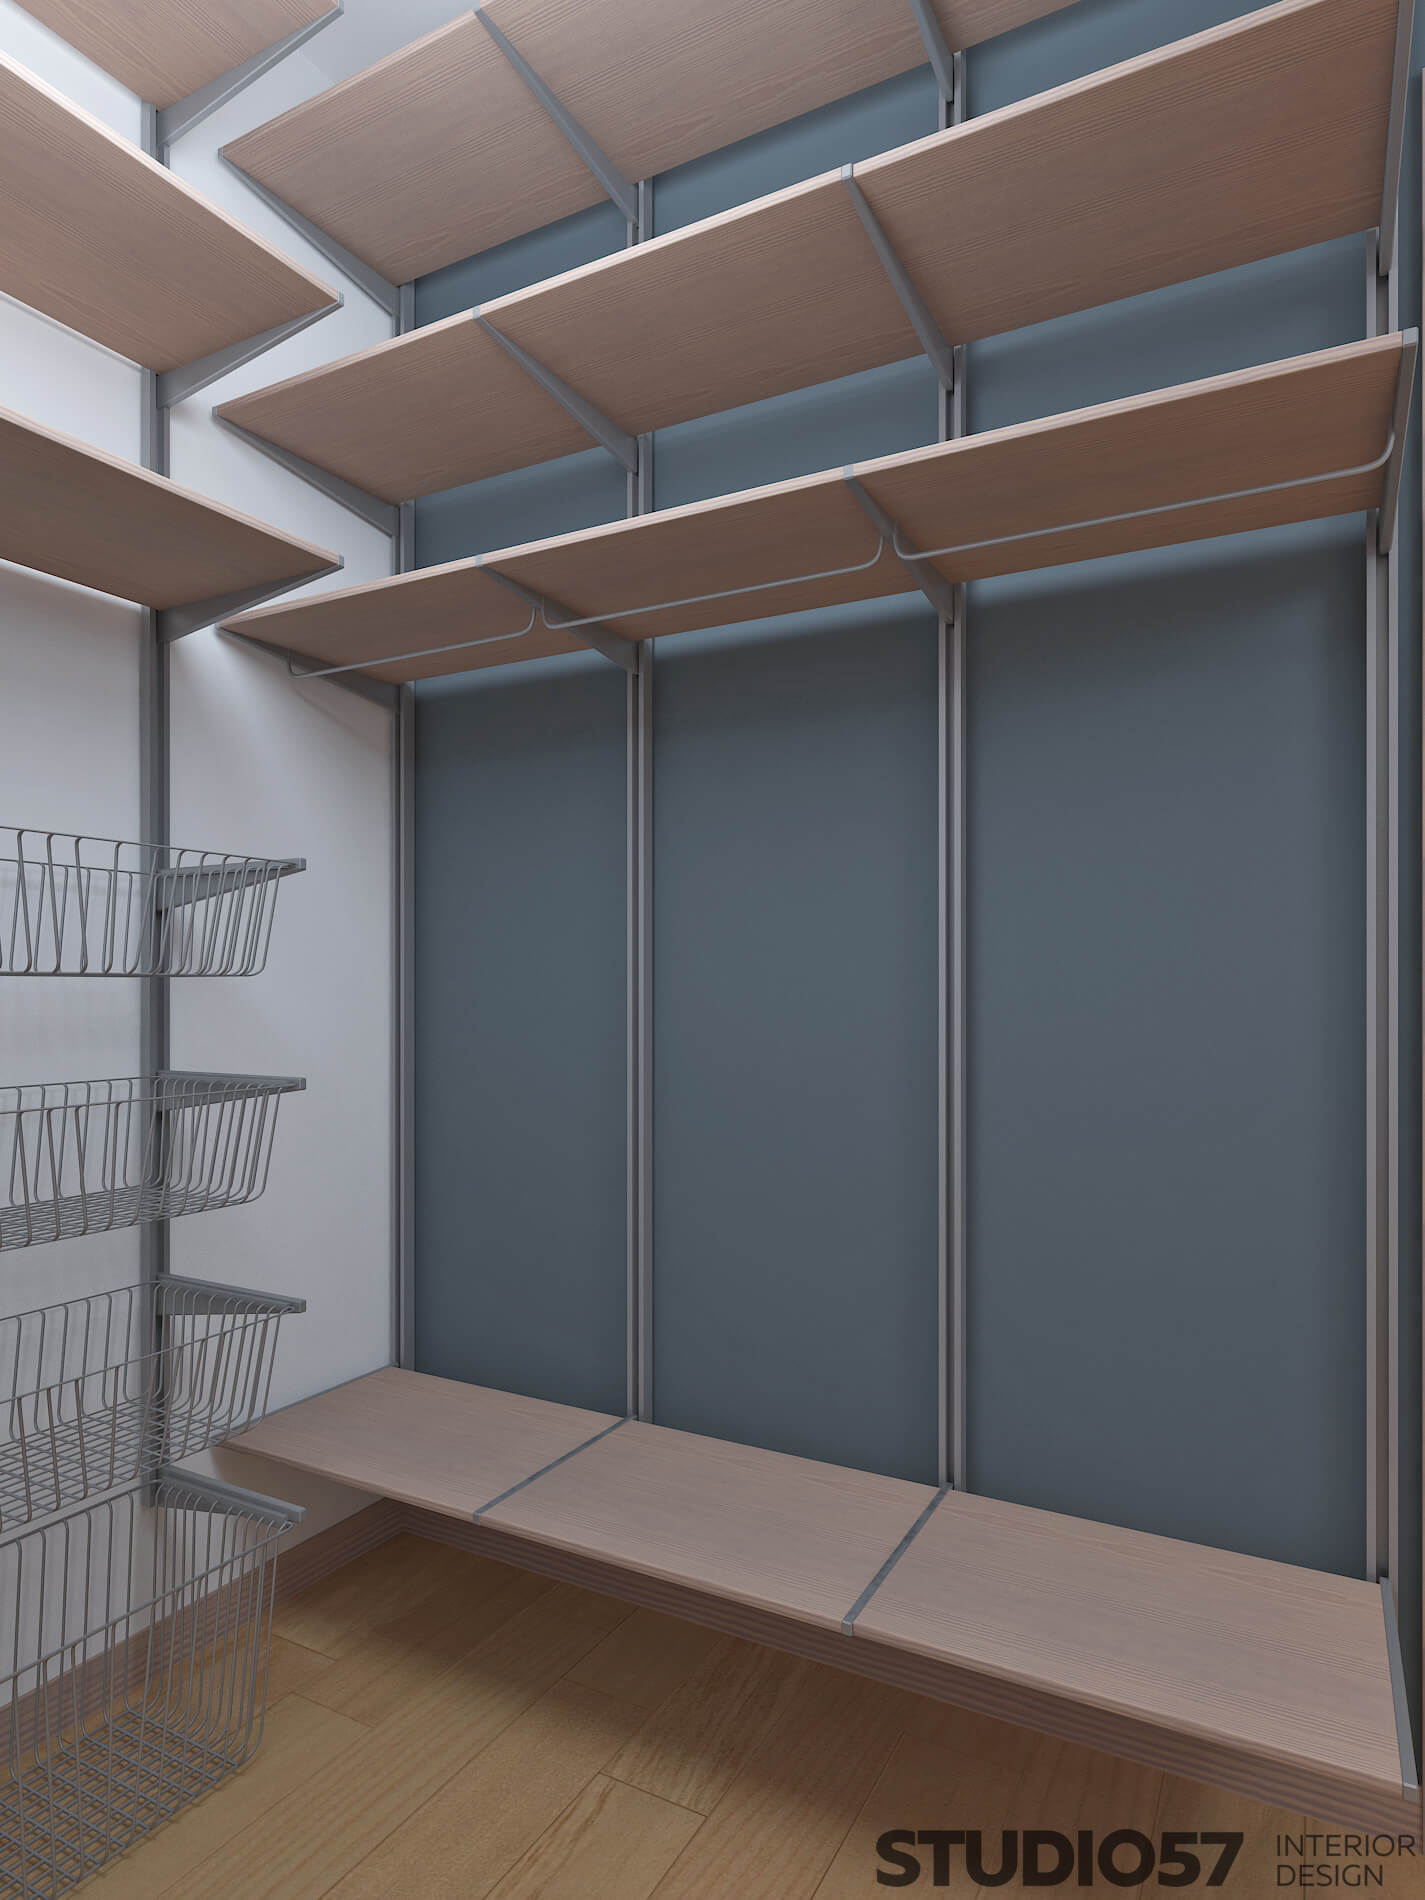 Cloakroom with shelves